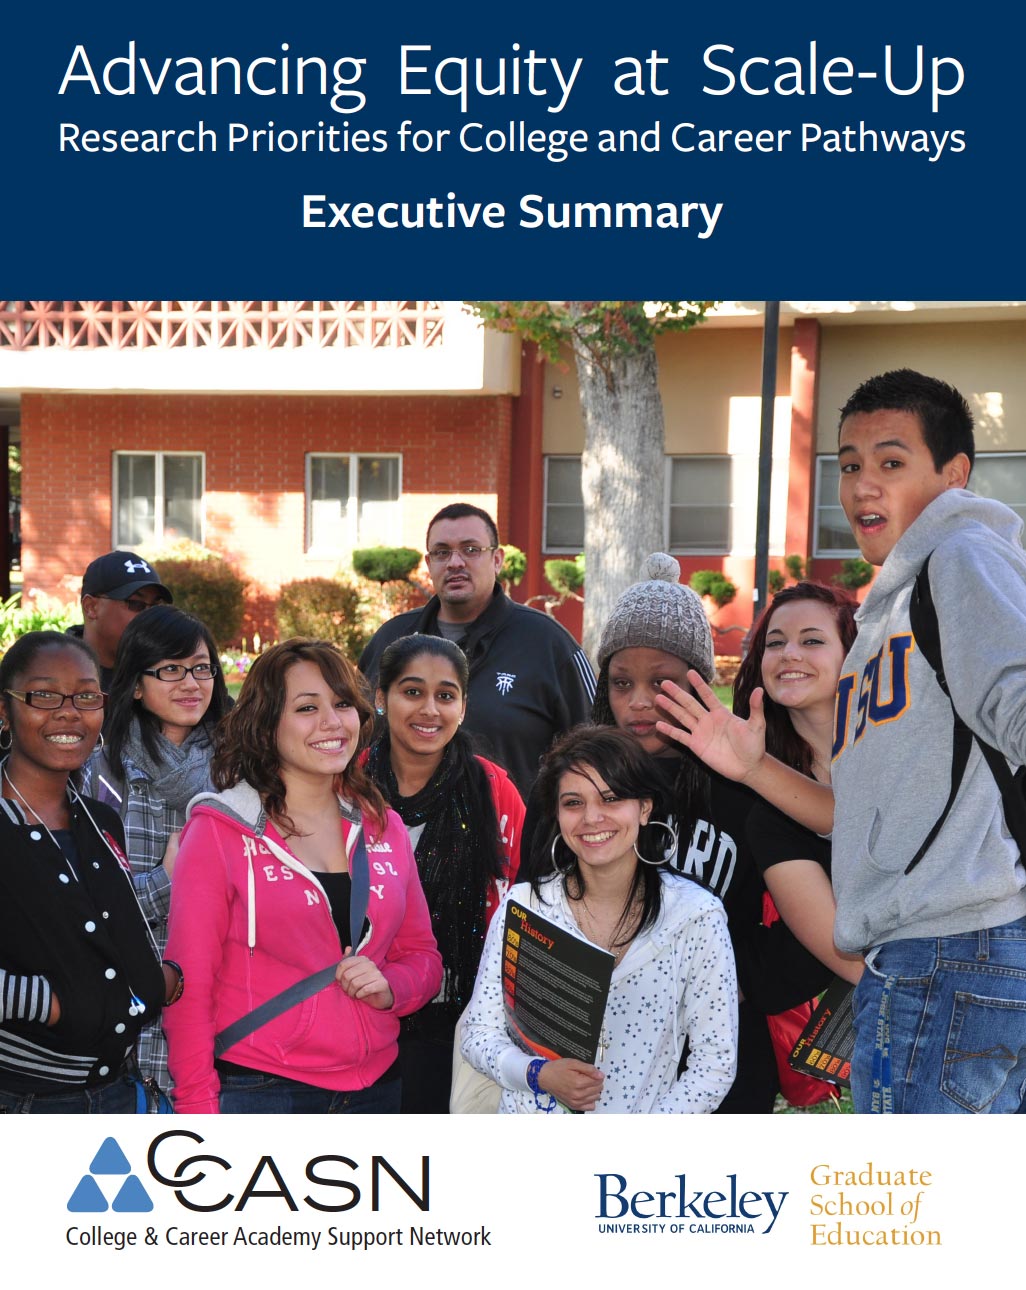 Advancing Equity at Scale-Up: Research Priorities for College and Career PAthways, Executive Summary